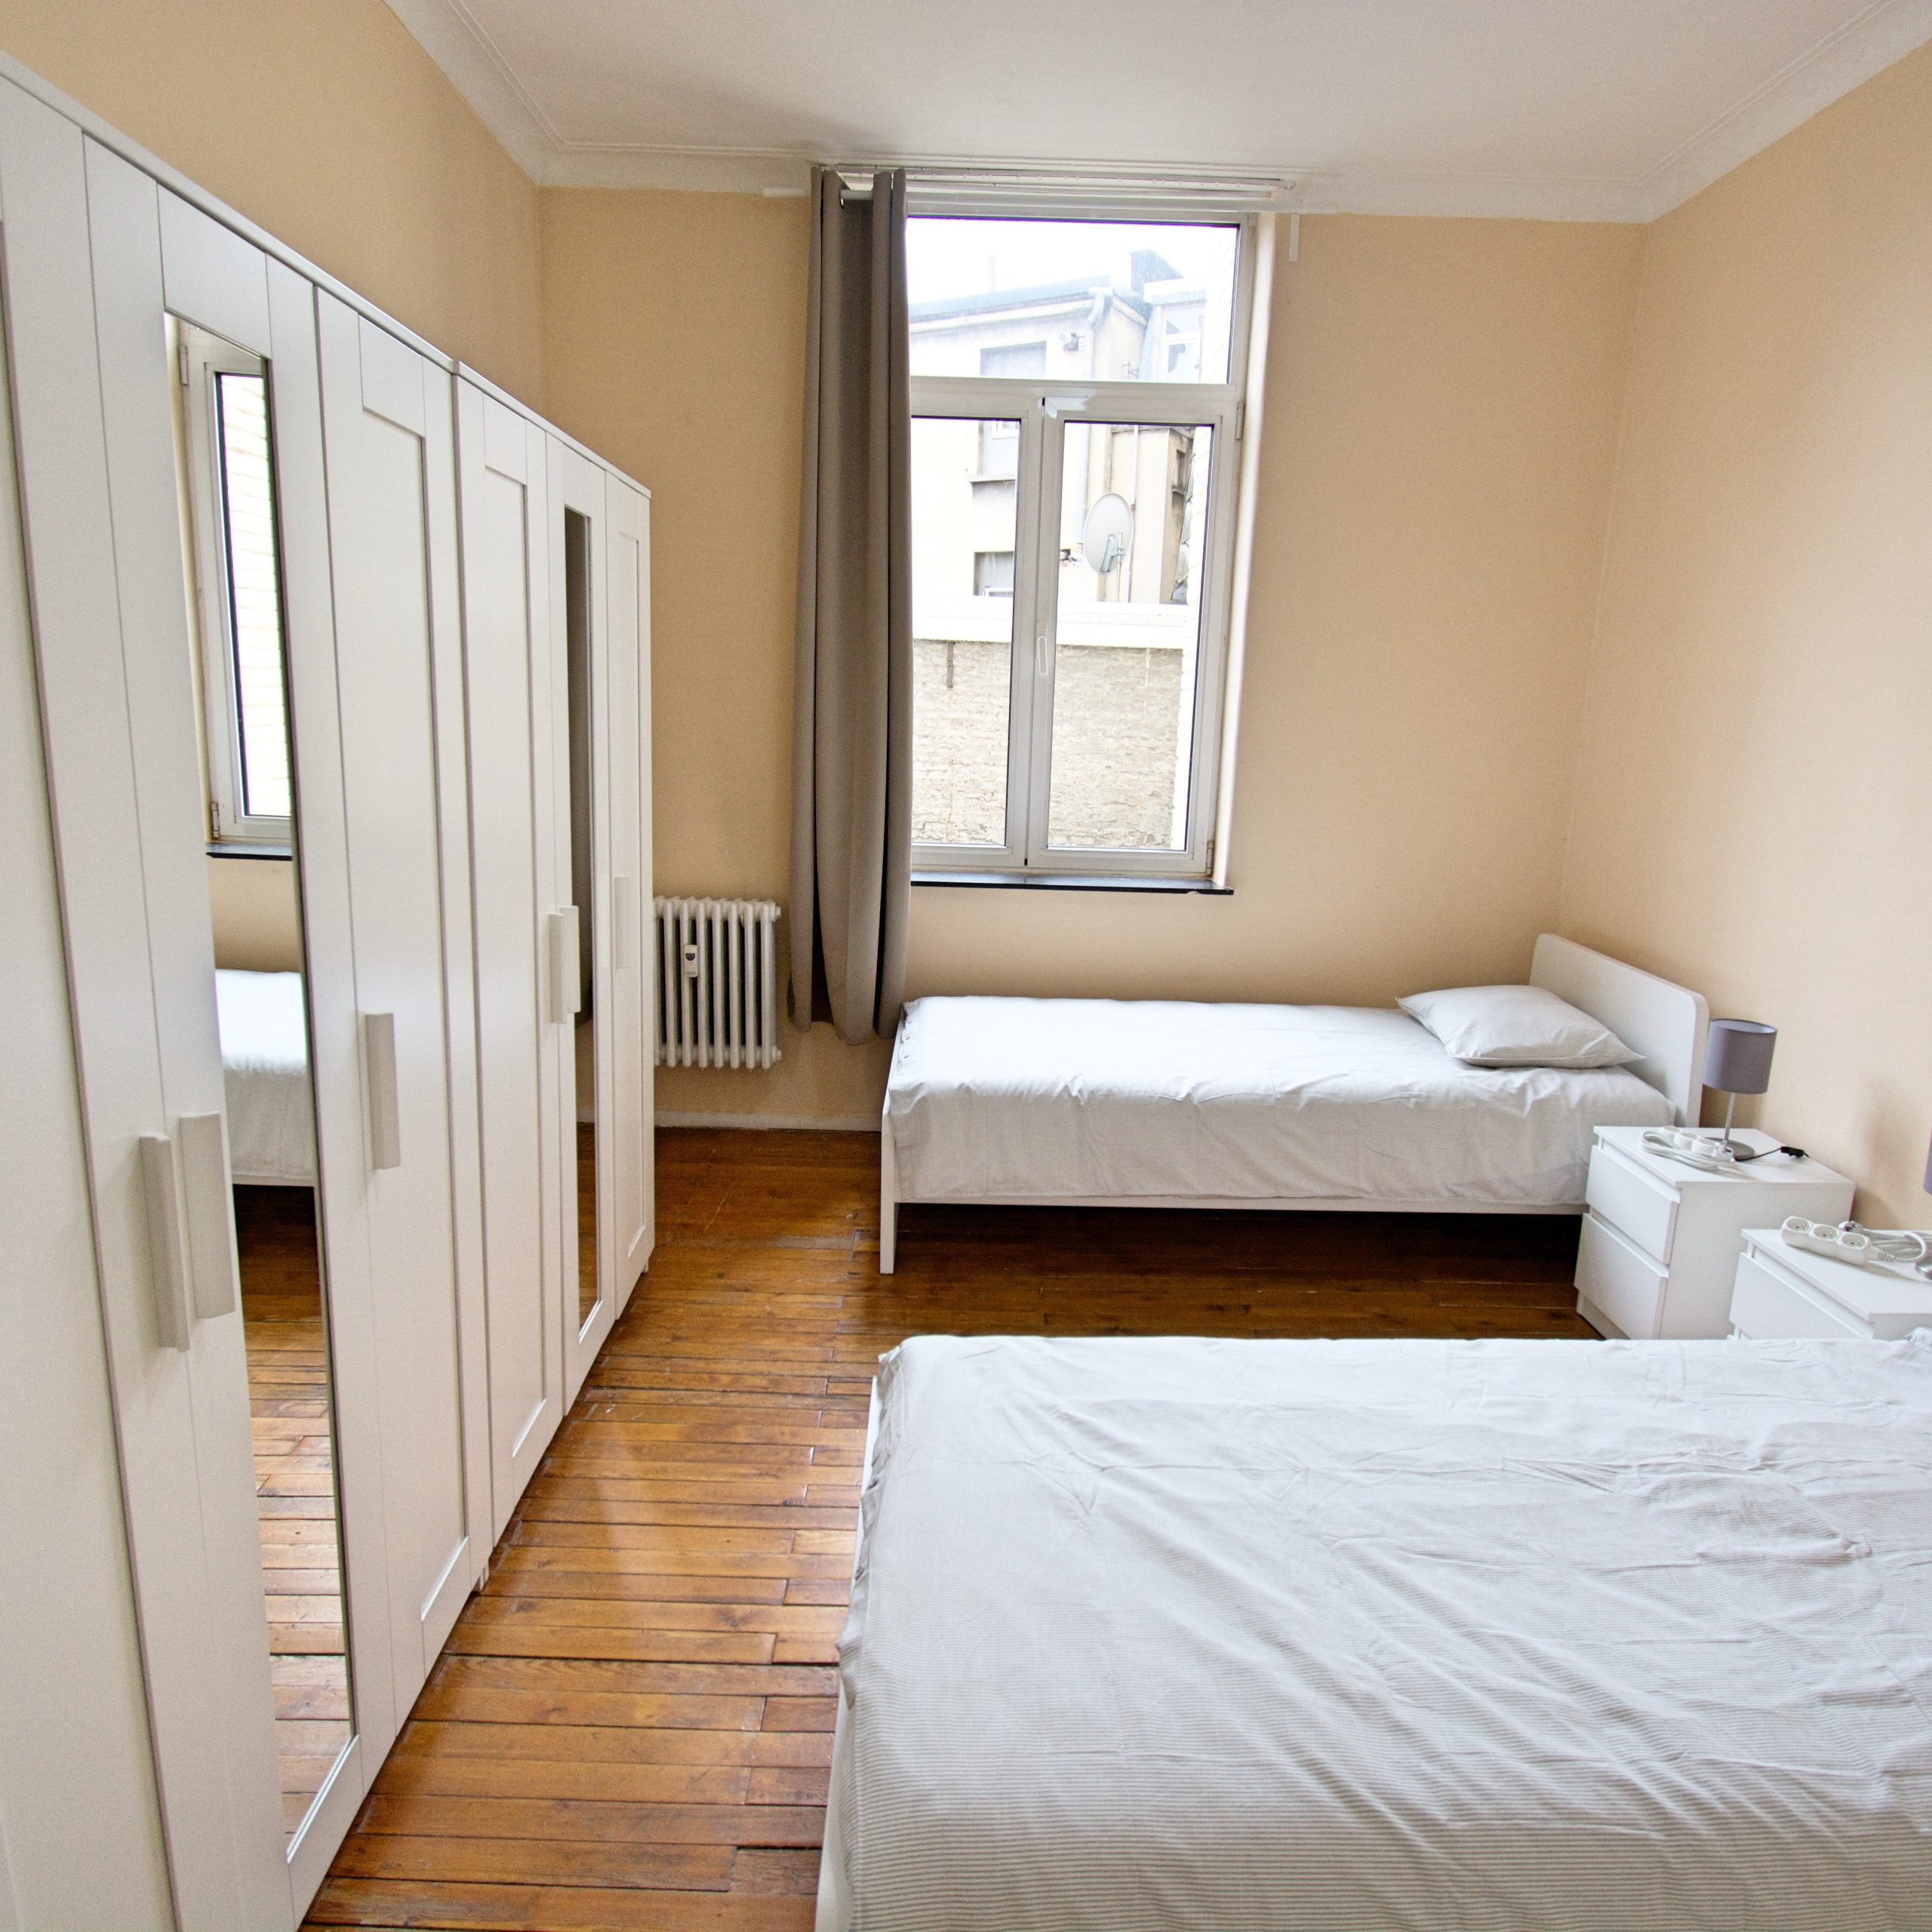 Isabella 4 – Rental apartment for workers in Antwerp